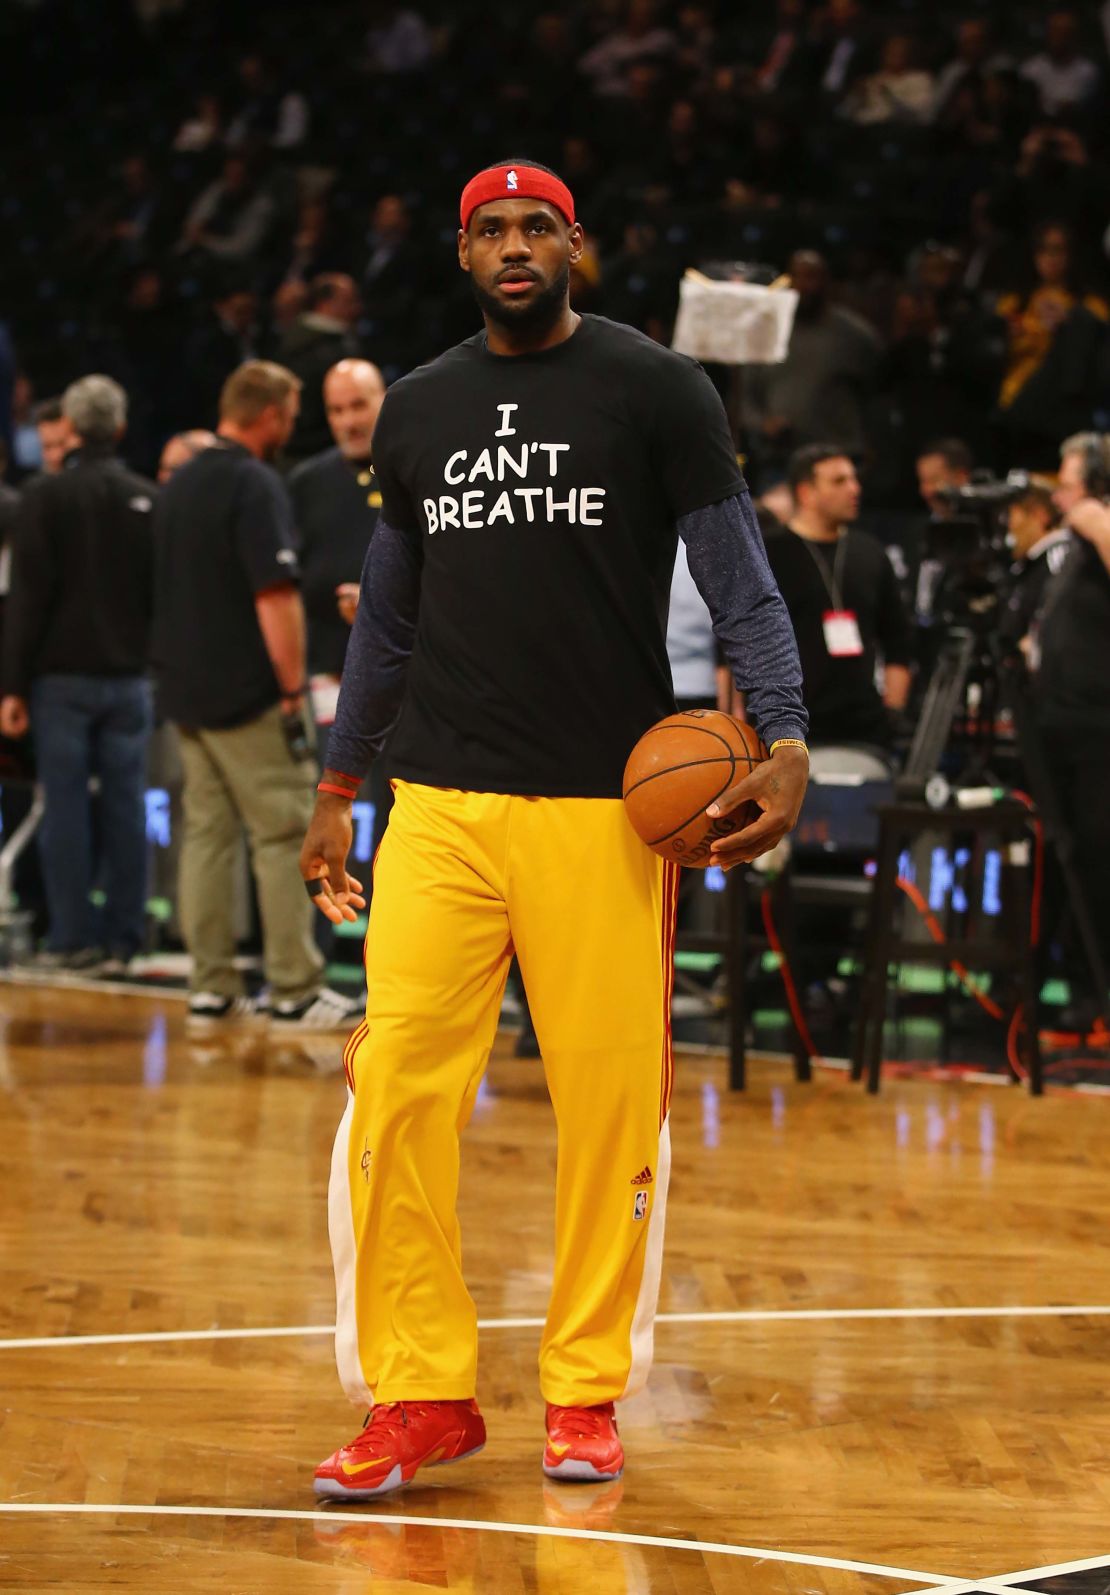 LeBron James wears an "I Can't Breathe" shirt during warmups before his game against the Brooklyn Nets at the Barclays Center on December 8, 2014, in New York.